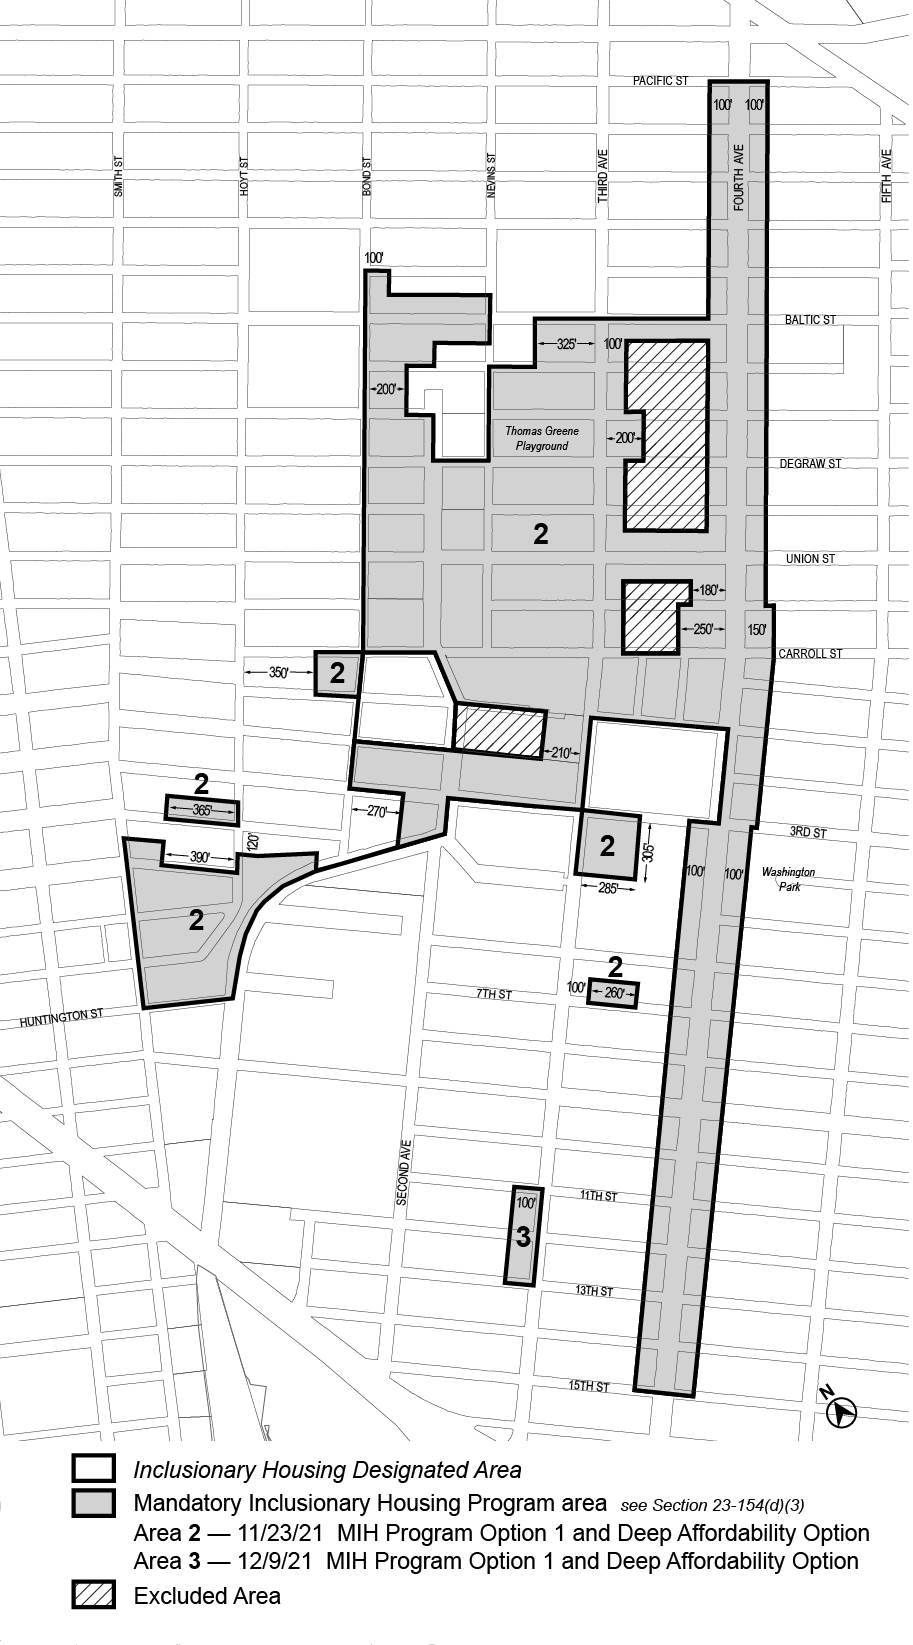 Added Area 3 to Map 1 of APPENDIX F CD6 Brooklyn (Option 1 and Deep Affordability Option), per 506 Third Avenue (N 210120 ZRK), adopted 9th December, 2021